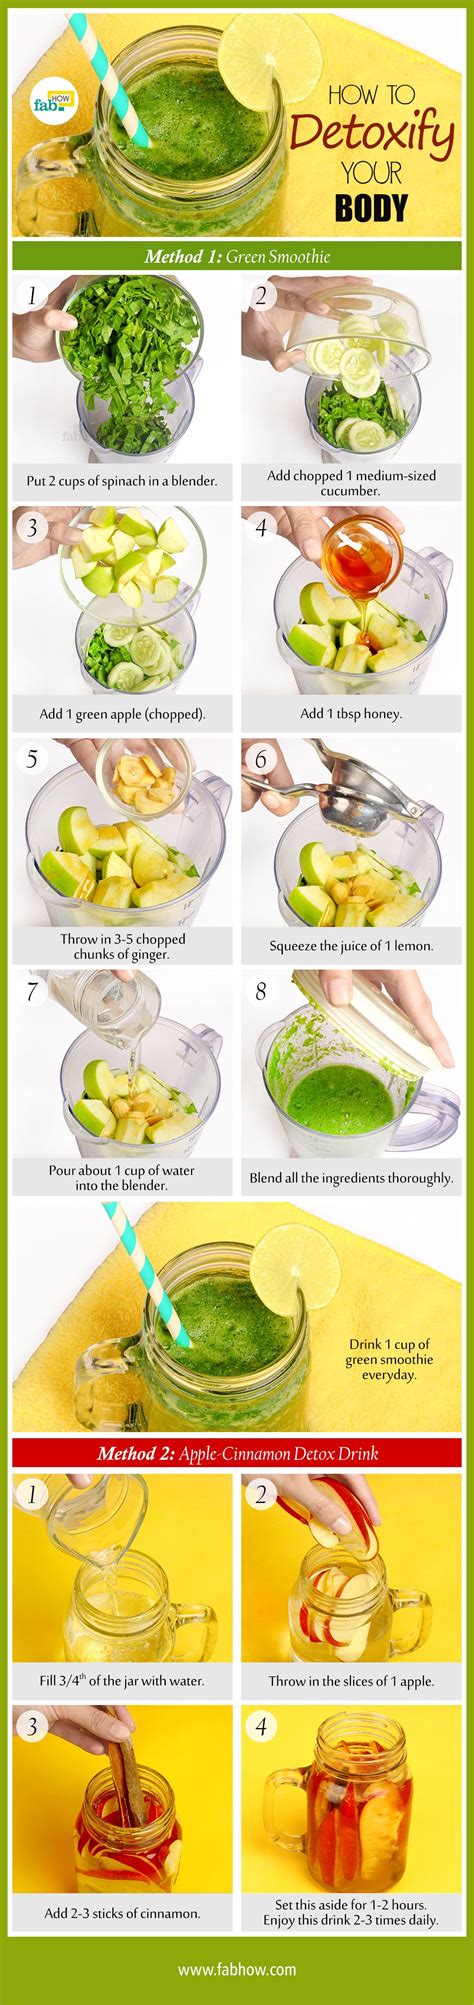 Top 3 Ways To Detox Your Body Naturally Fab How